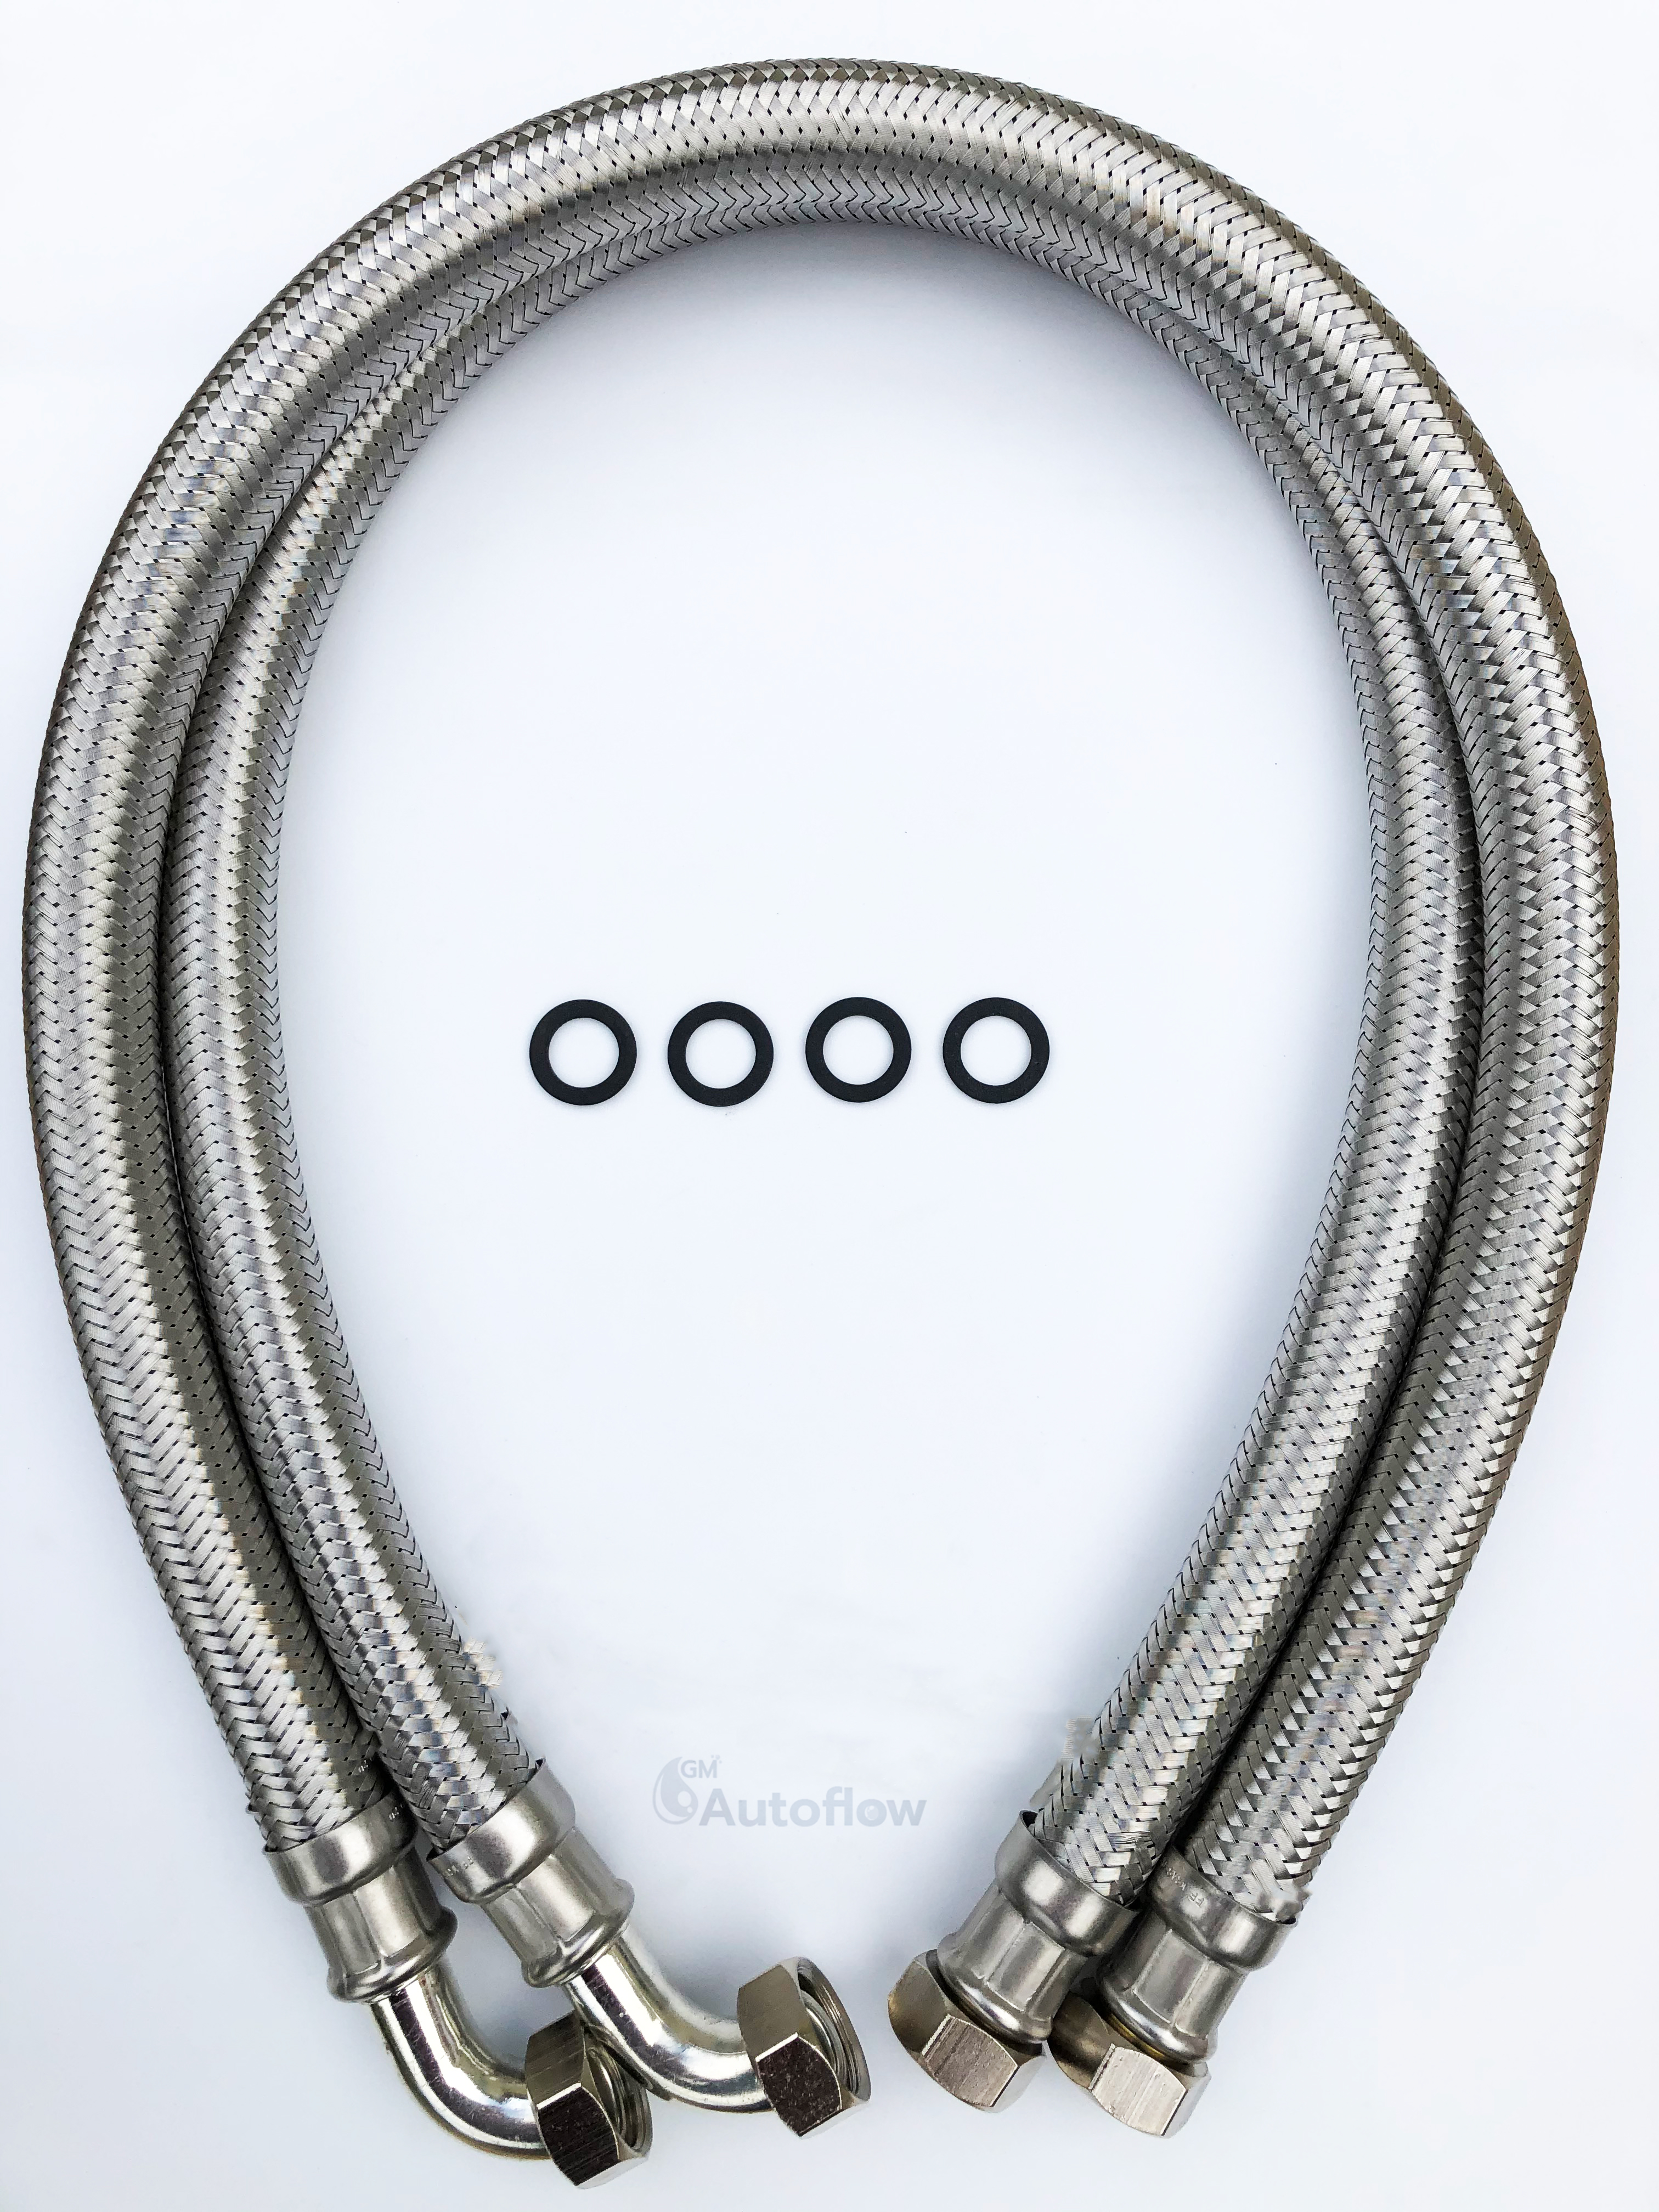 22mm Stainless Steel Hoses, 800mm long Pair AF703 - WRAS APPROVED